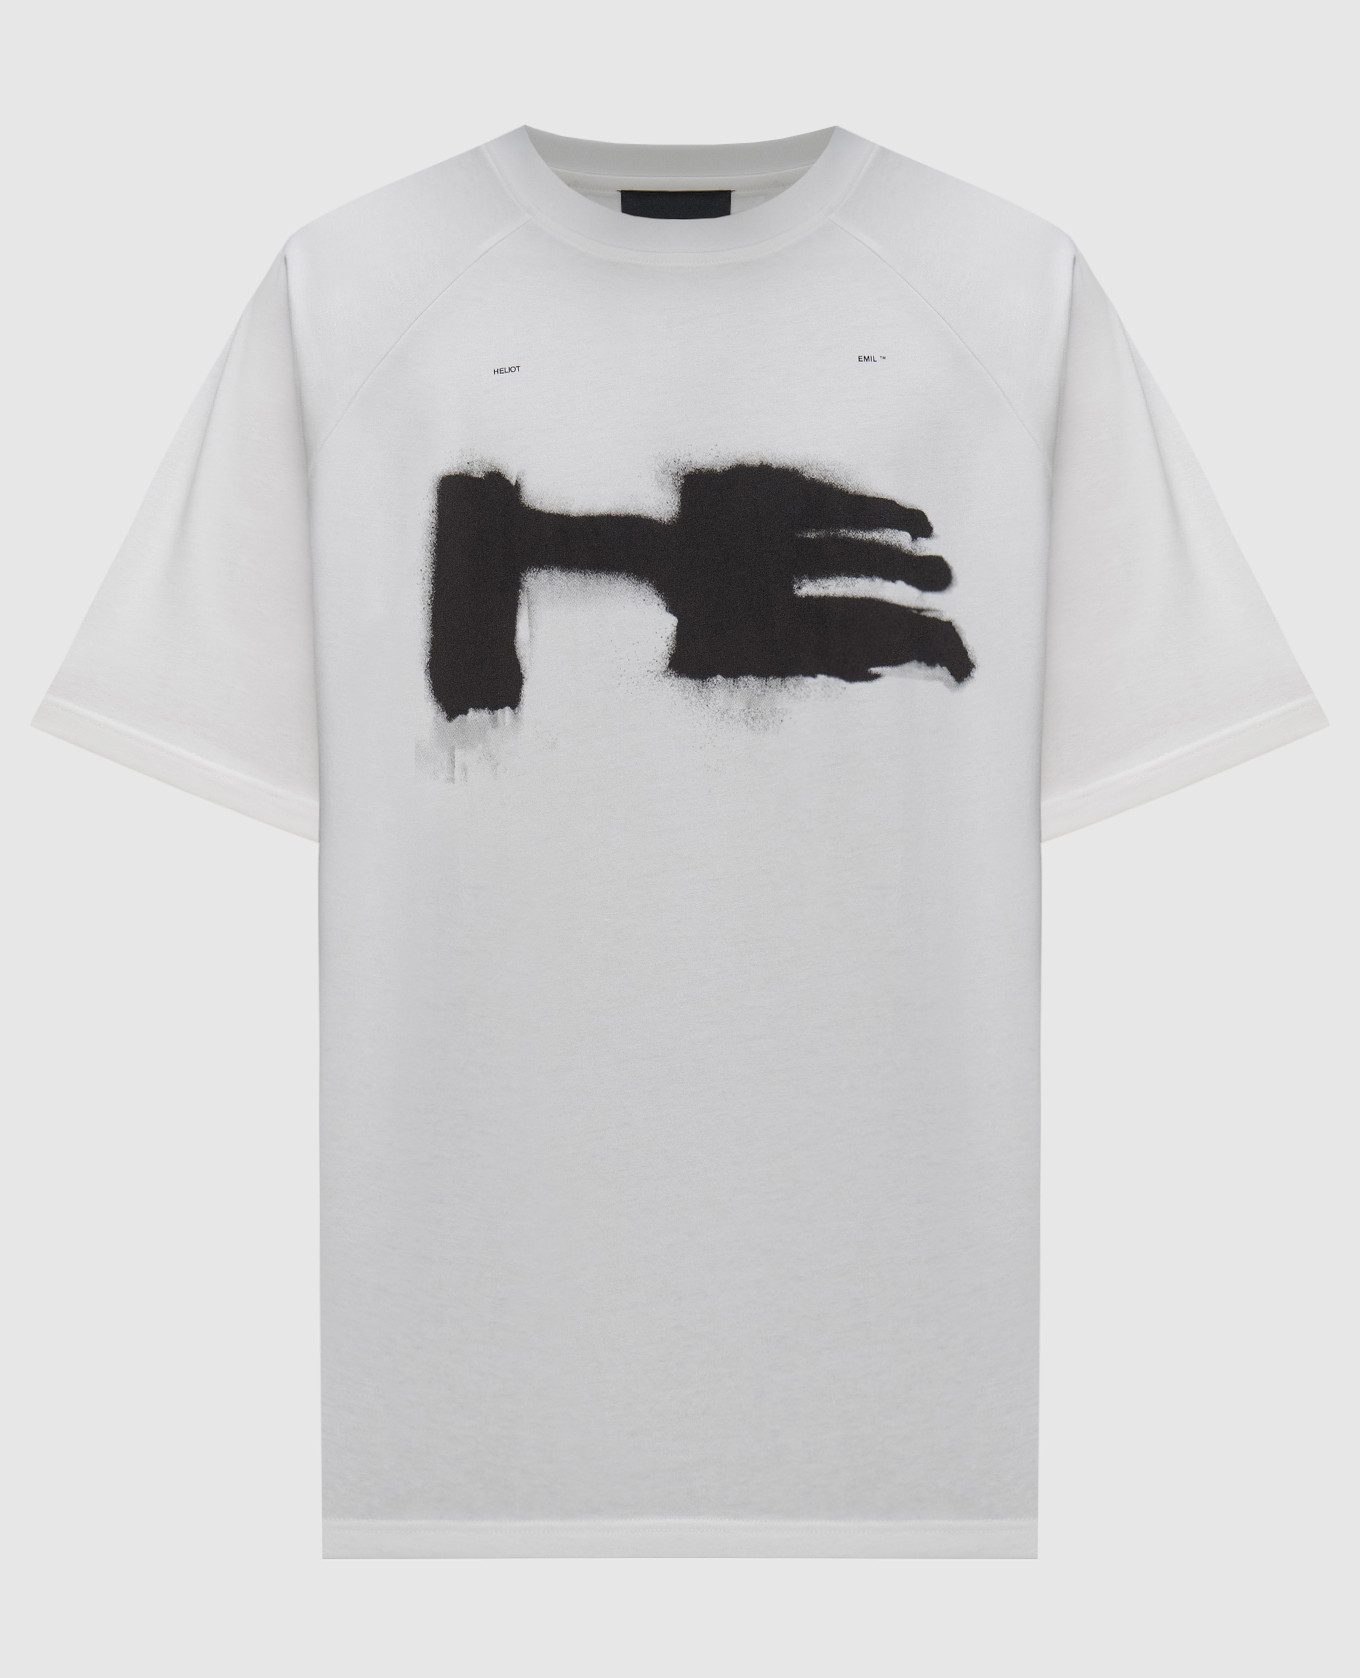 White T-shirt by Xylem with a print